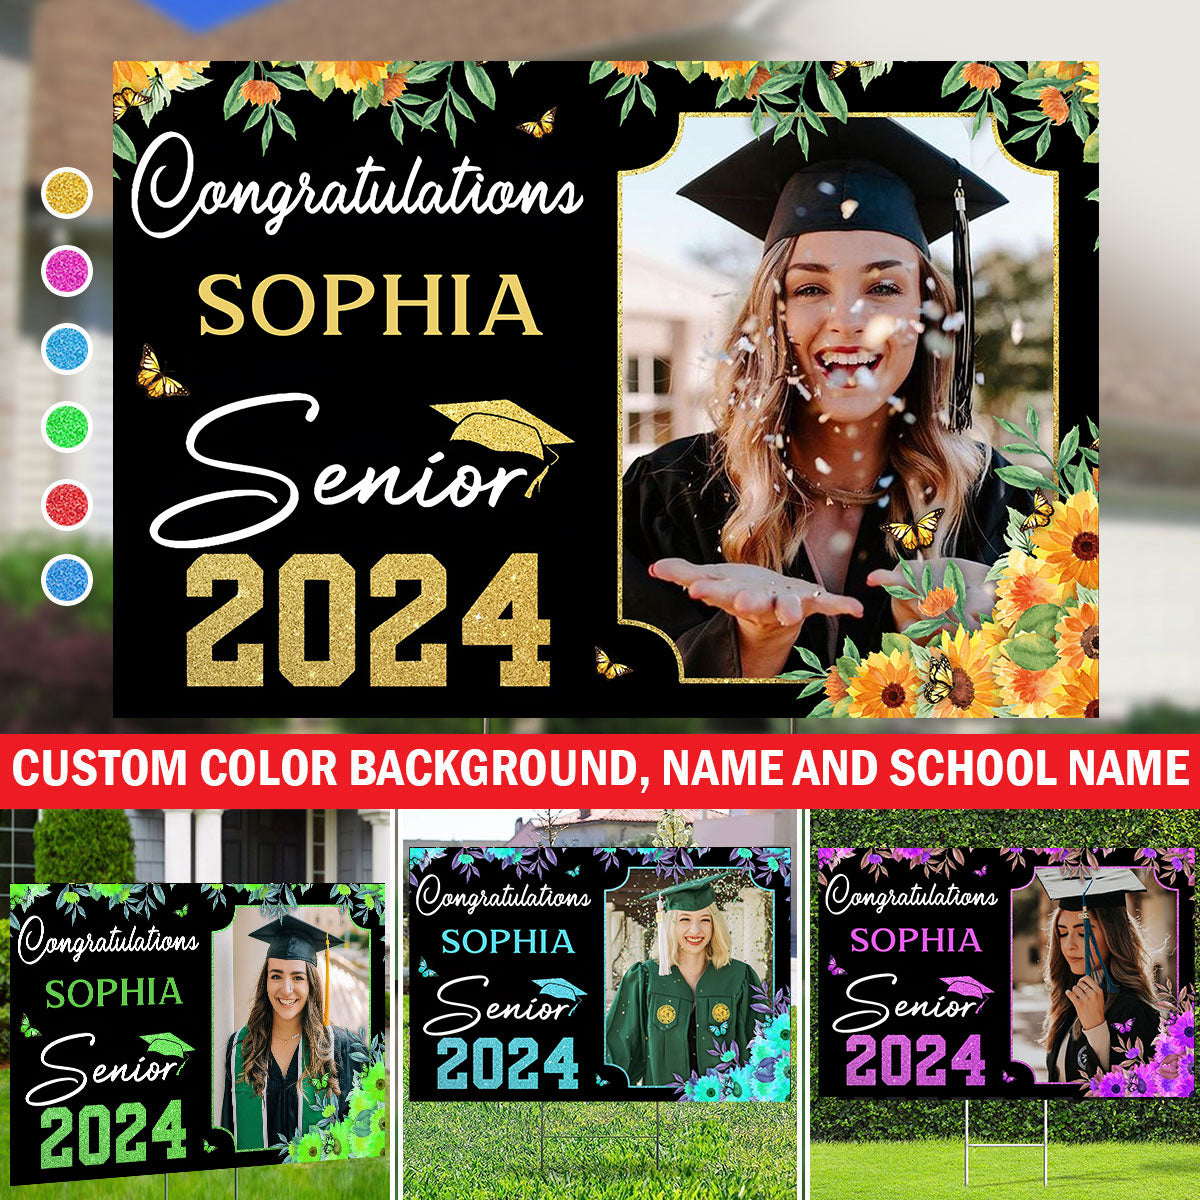 Congratulation 2024 Custom Background, Photo And Texts - Personalized Lawn Sign, Yard Sign, Gift For Graduation